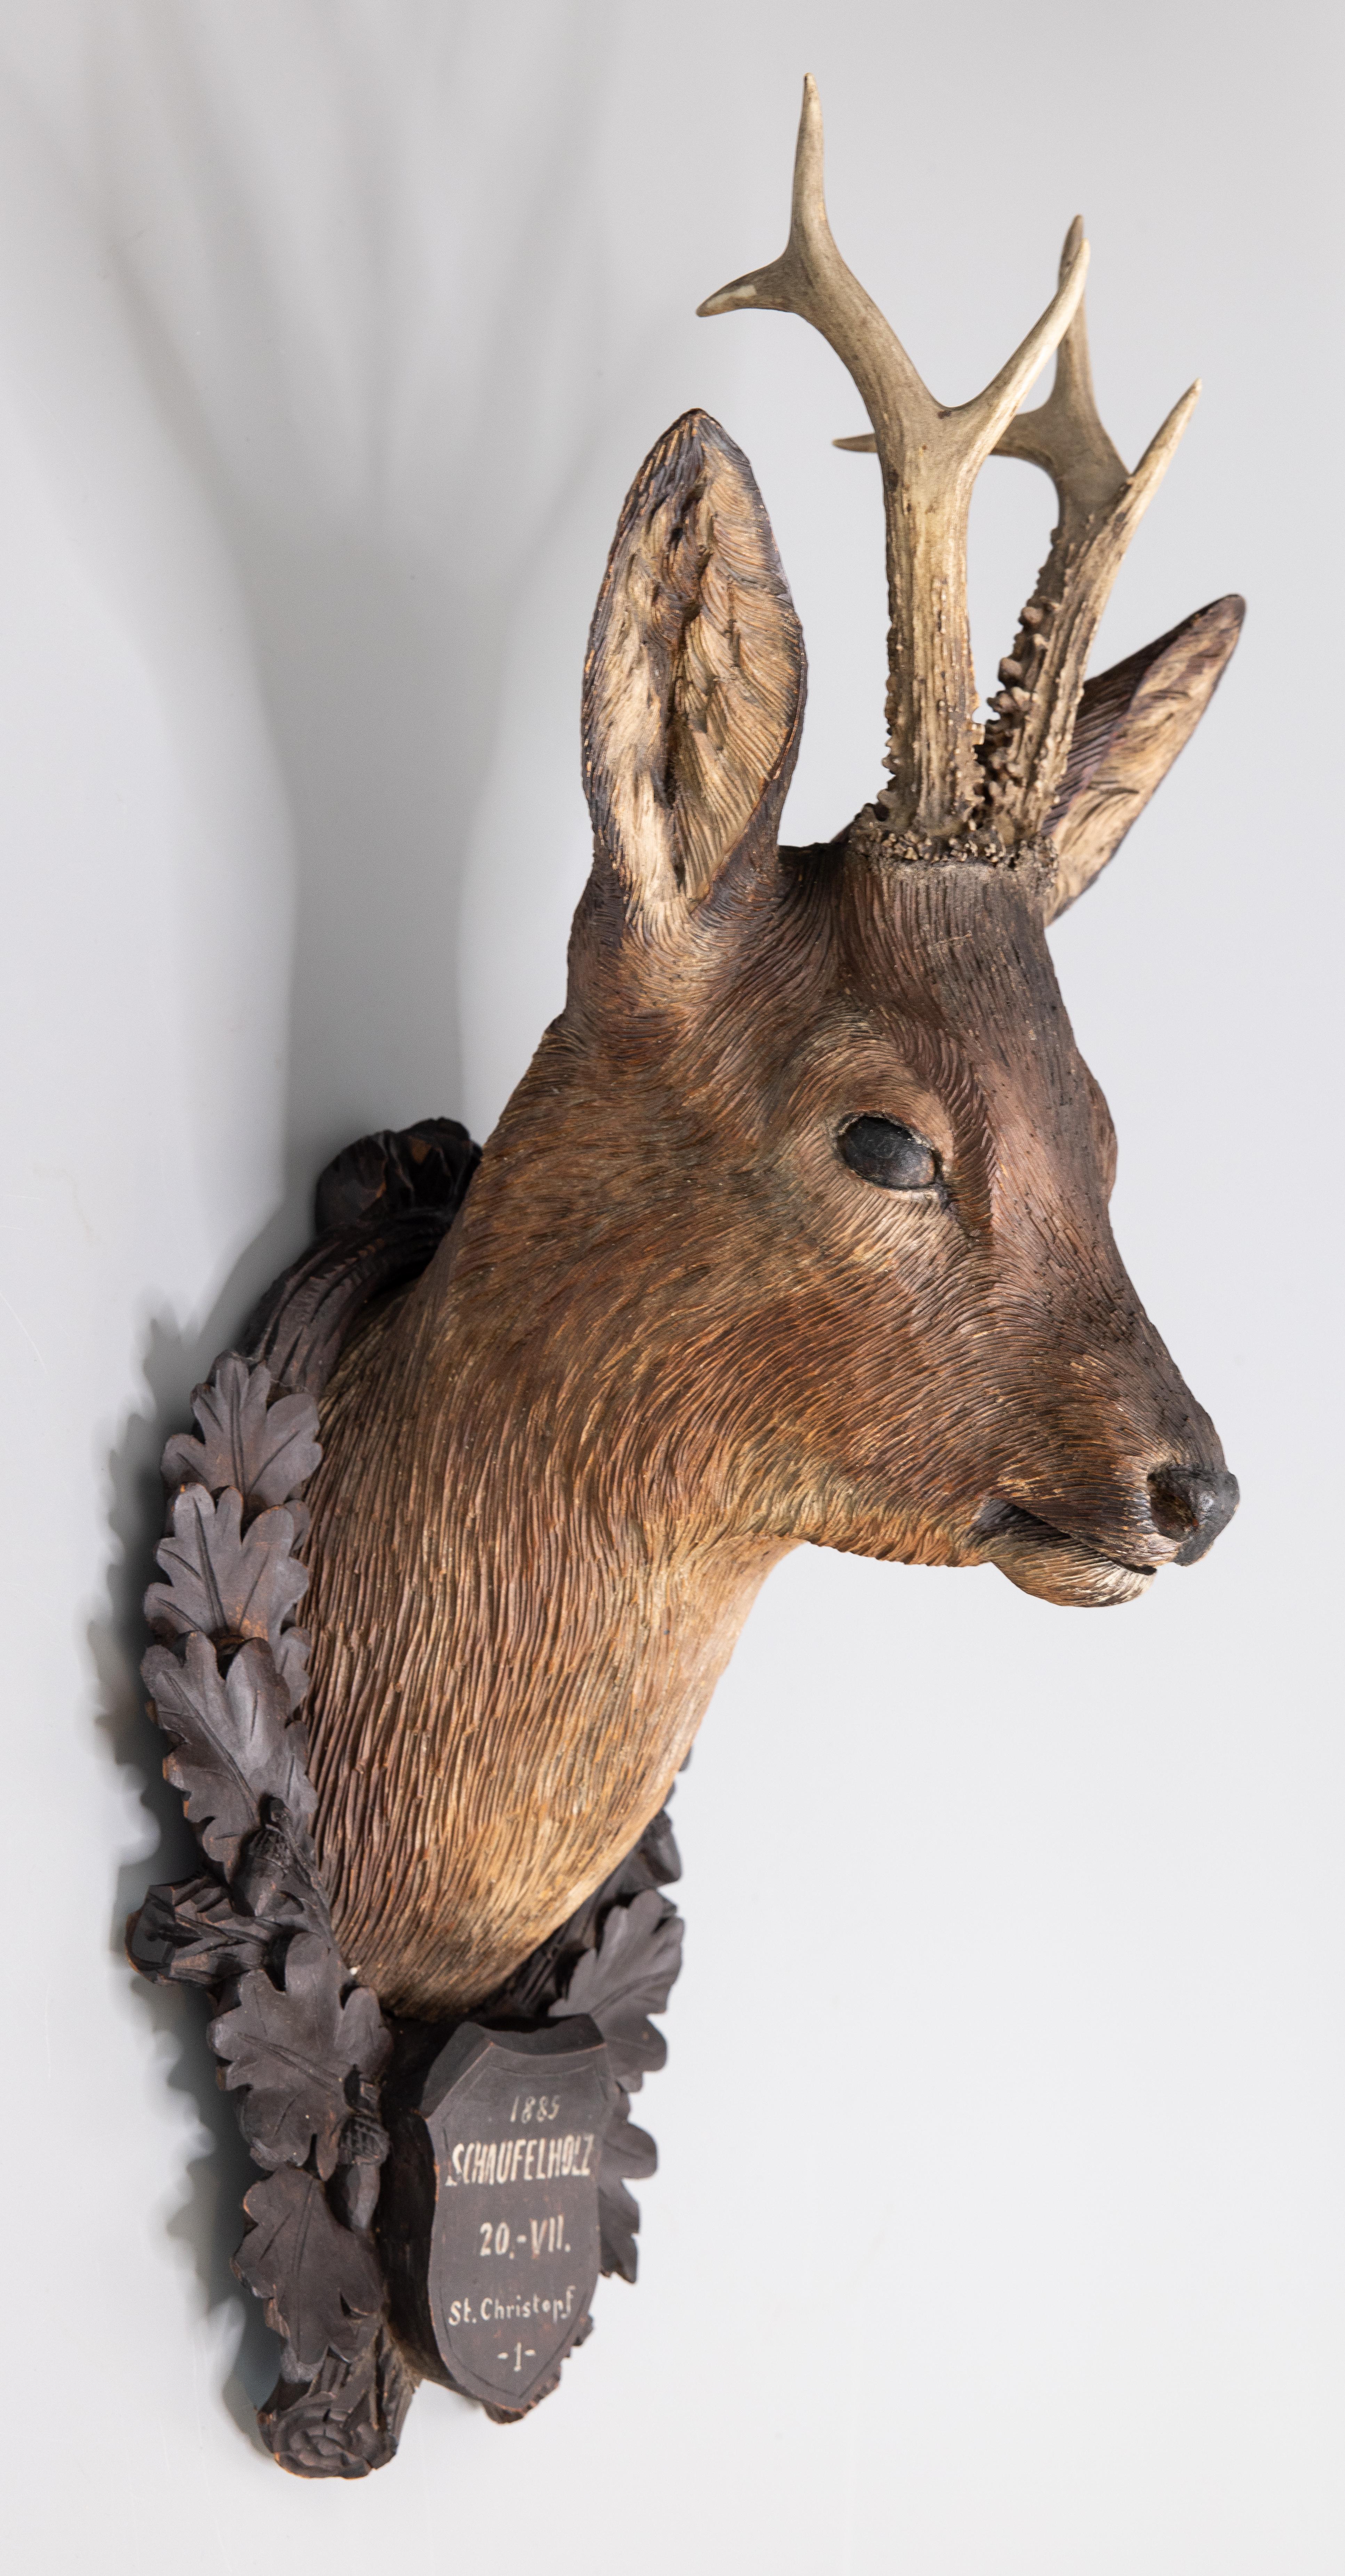 A superb antique hand carved wood stag or deer mount hunting trophy with real antler horns on a black forest plaque from Austria, dated July 20, 1885. The stag head is naturalistically carved with fine details and the plaque is decorated with oak